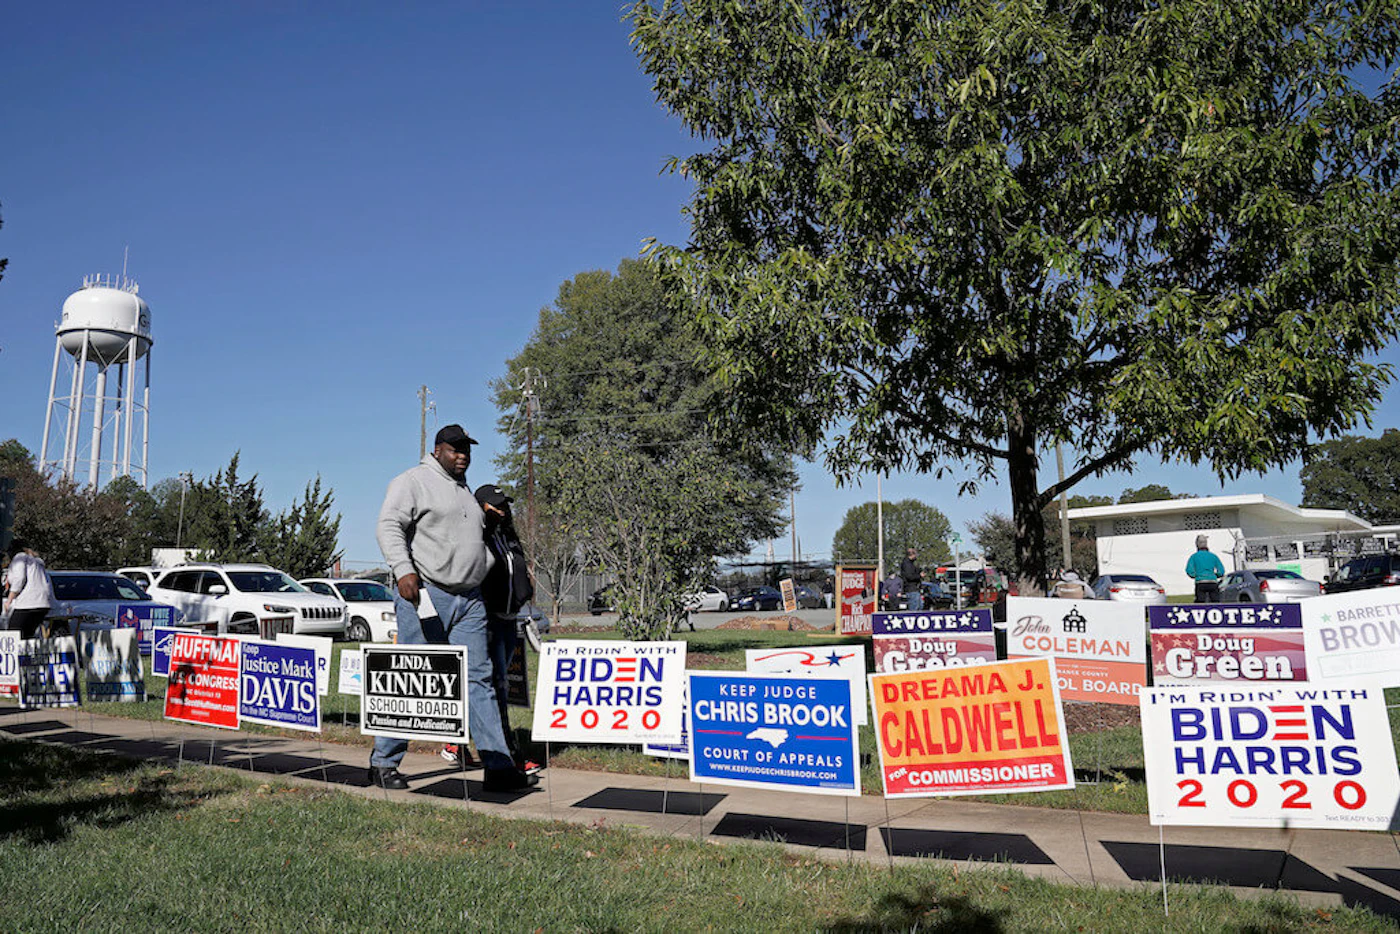 Voters at the Graham Civic Center polling site in Graham, N.C., Tuesday, Nov. 3, 2020. (AP Photo/Gerry Broome)